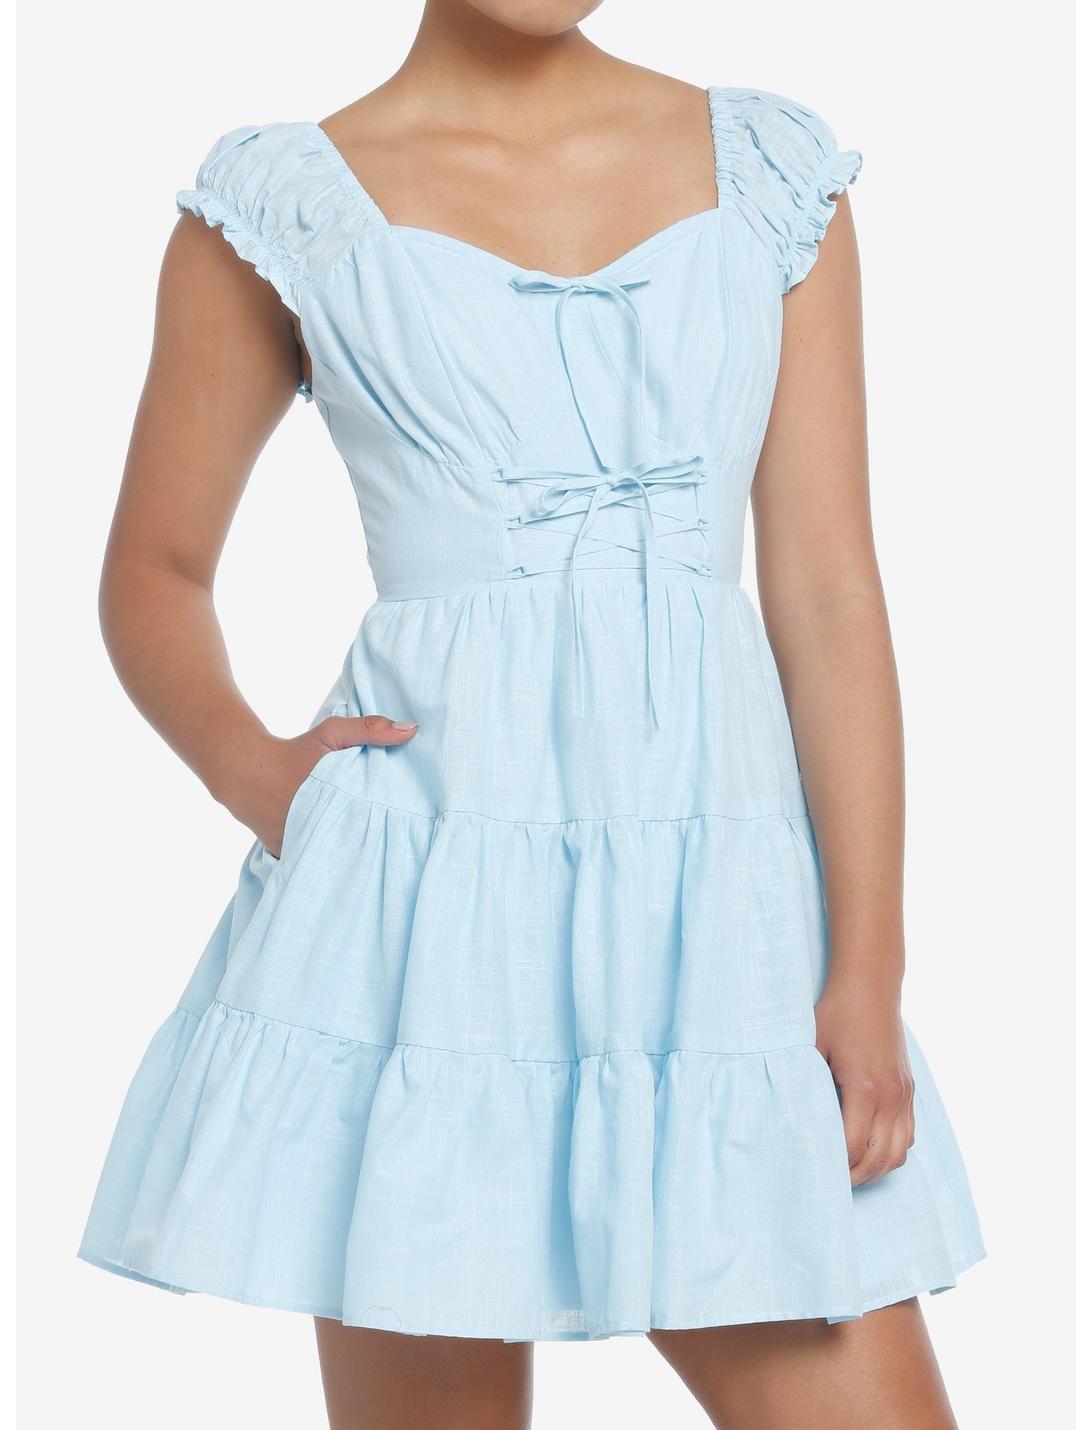 Sweet Society Baby Blue Tiered Dress, MULTI, hi-res